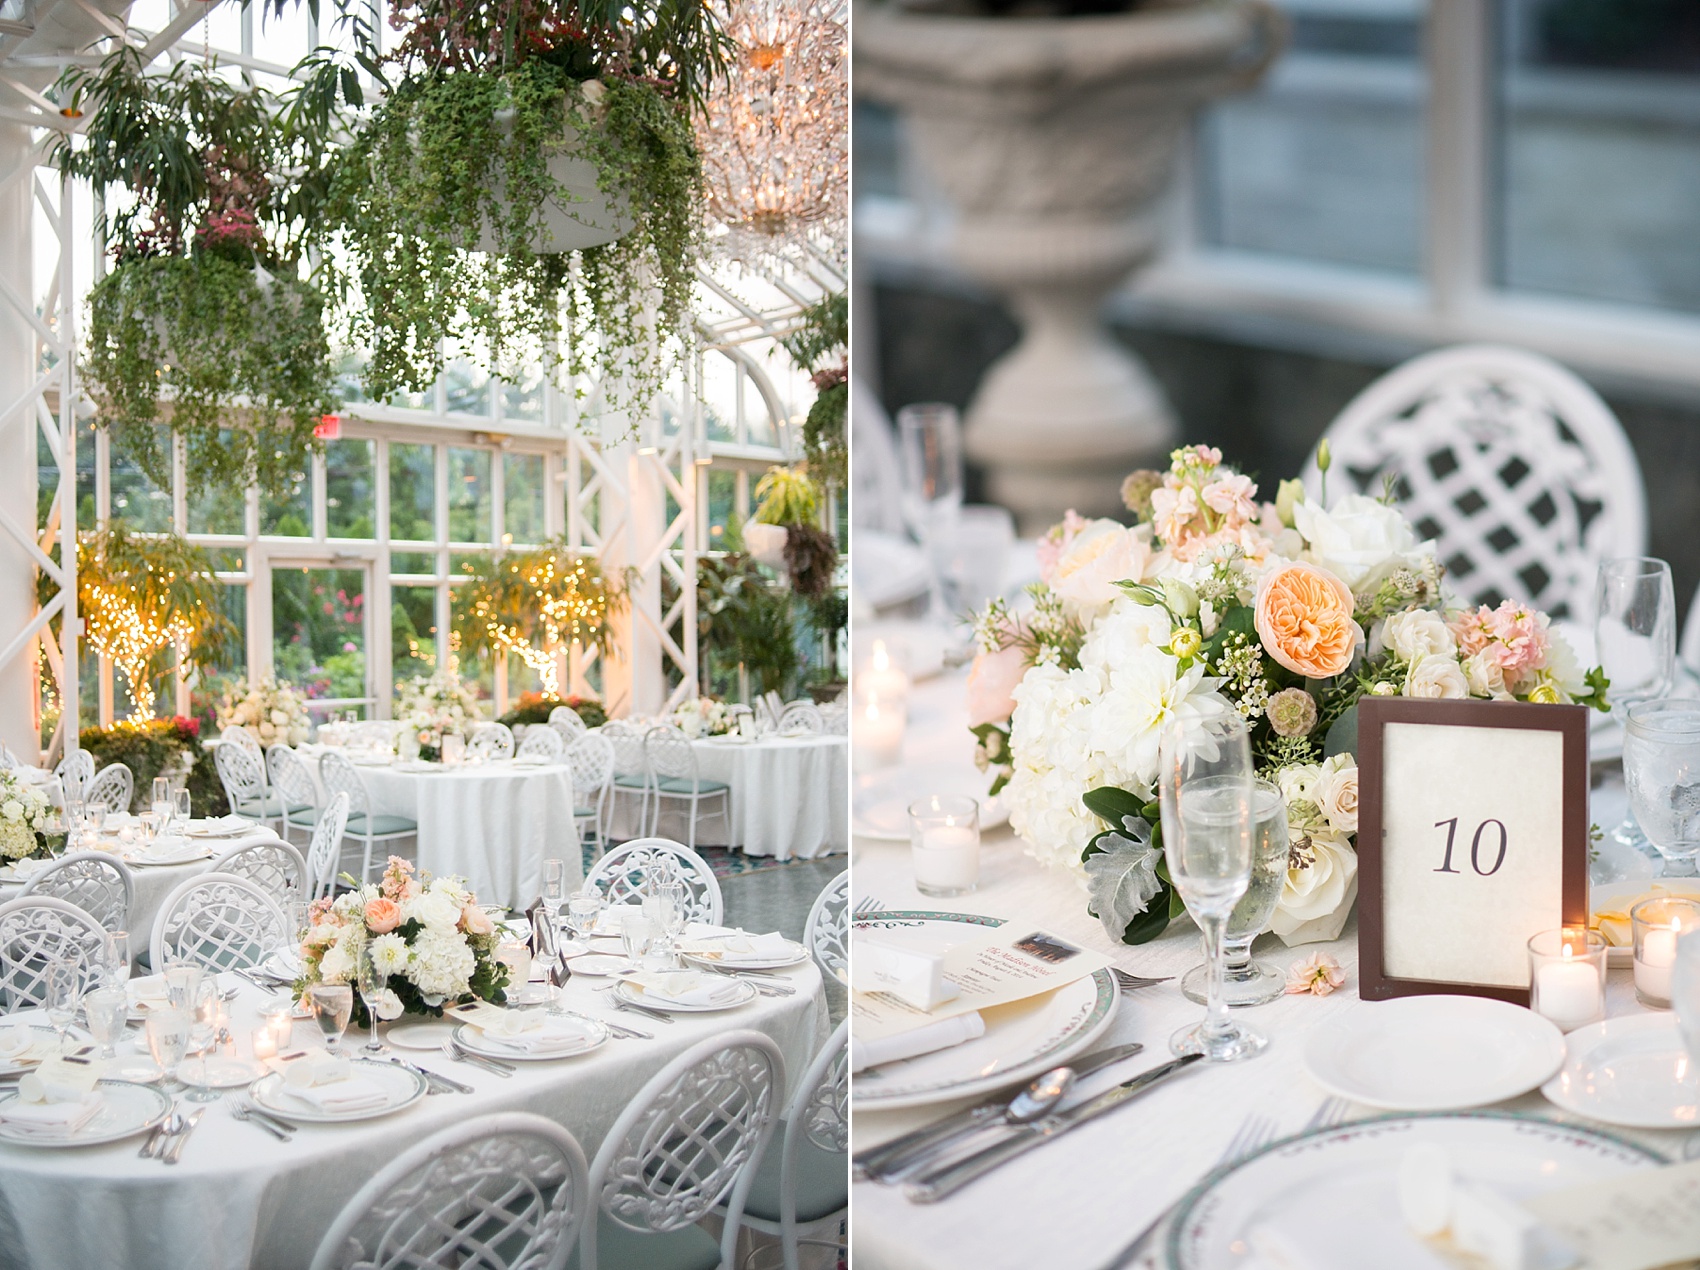 Wedding reception at the Conservatory at The Madison Hotel, New Jersey. Photos by Mikkel Paige Photography.